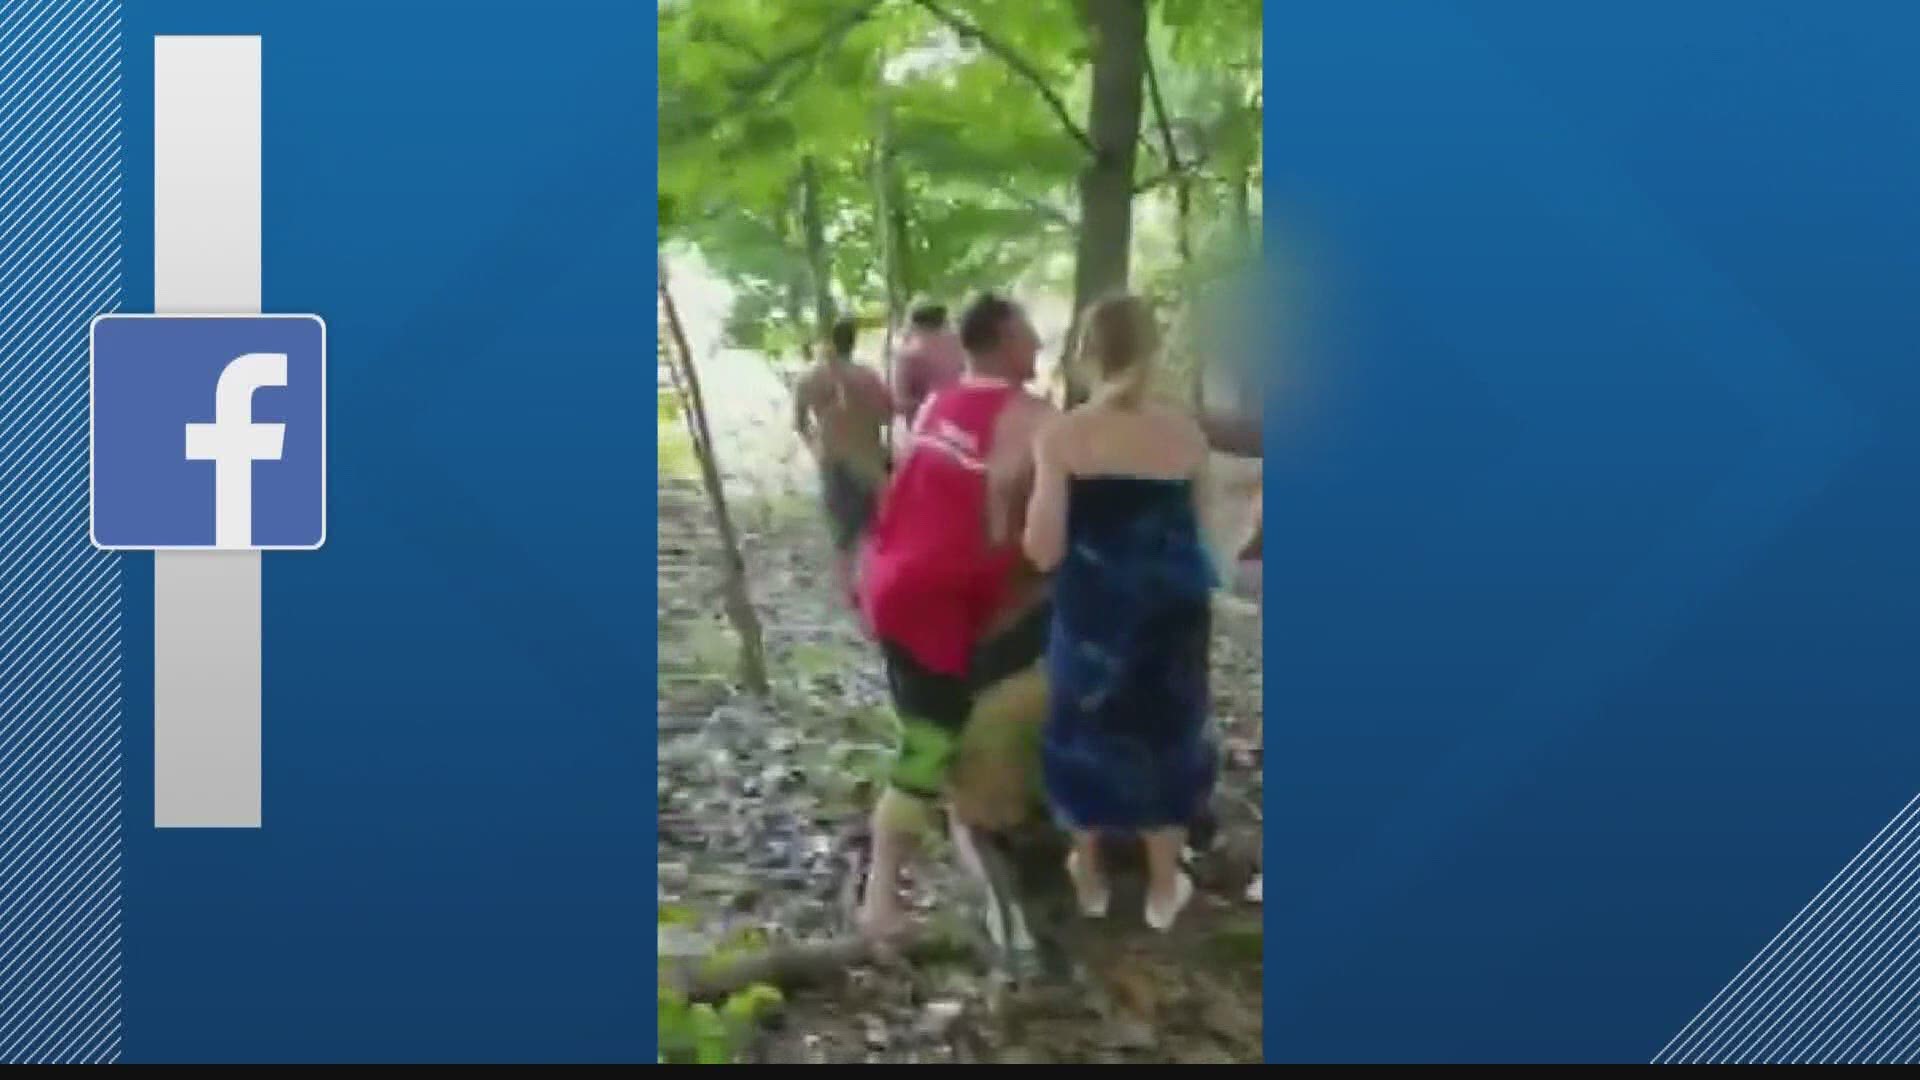 The Monroe County prosecutor is looking over possible charges from an alleged assault caught on video at Lake Monroe.